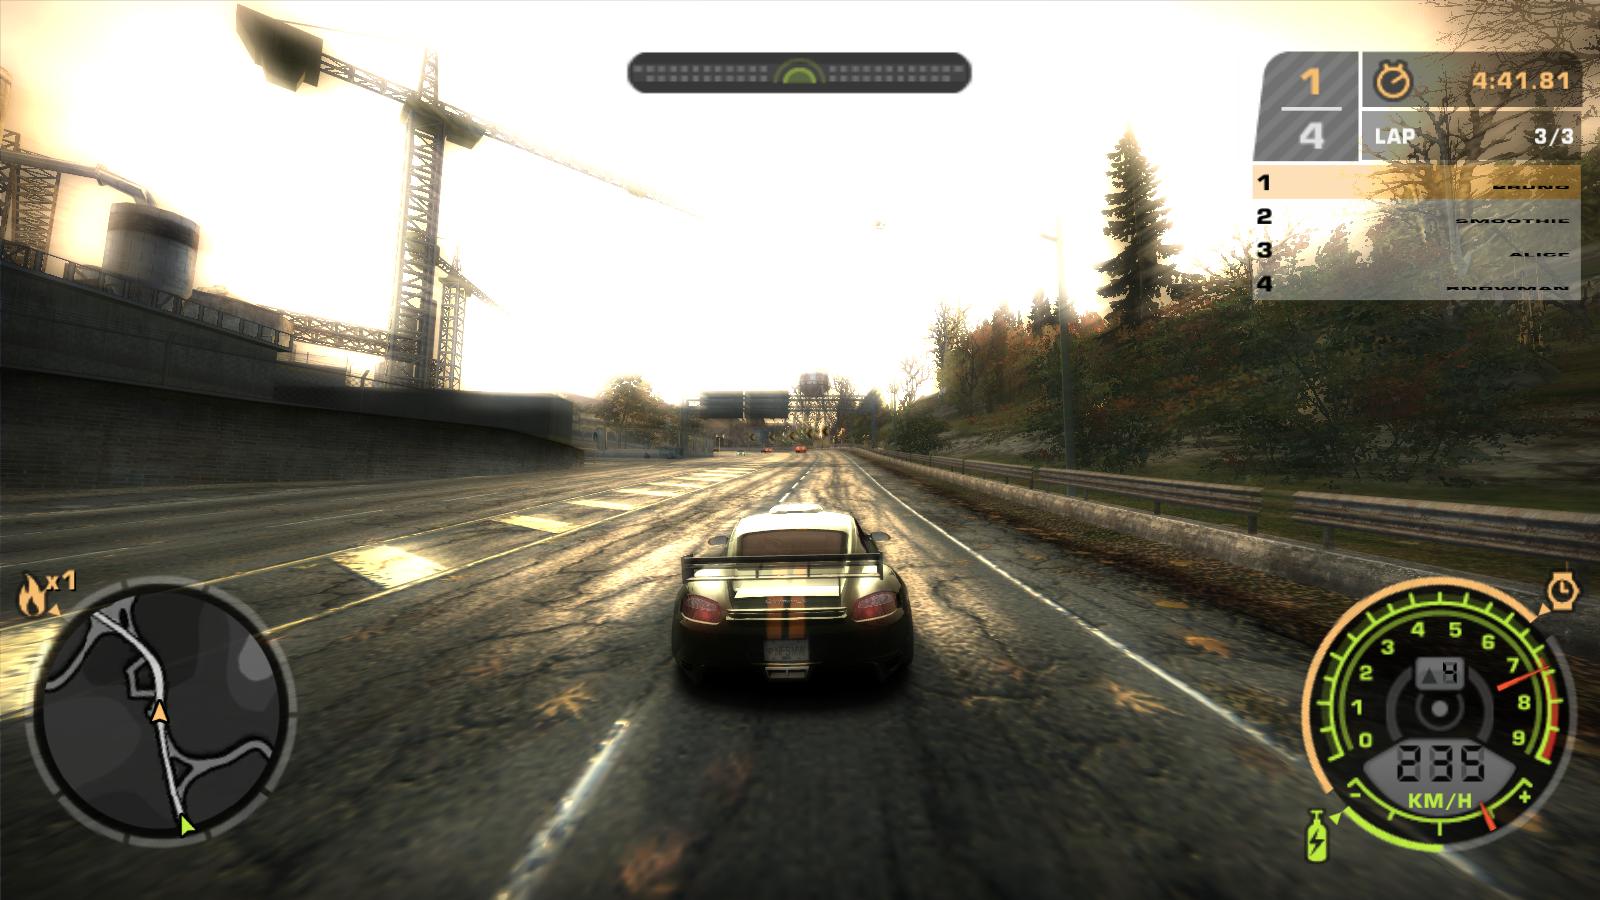 Nfs most wanted 2005 стим фото 83